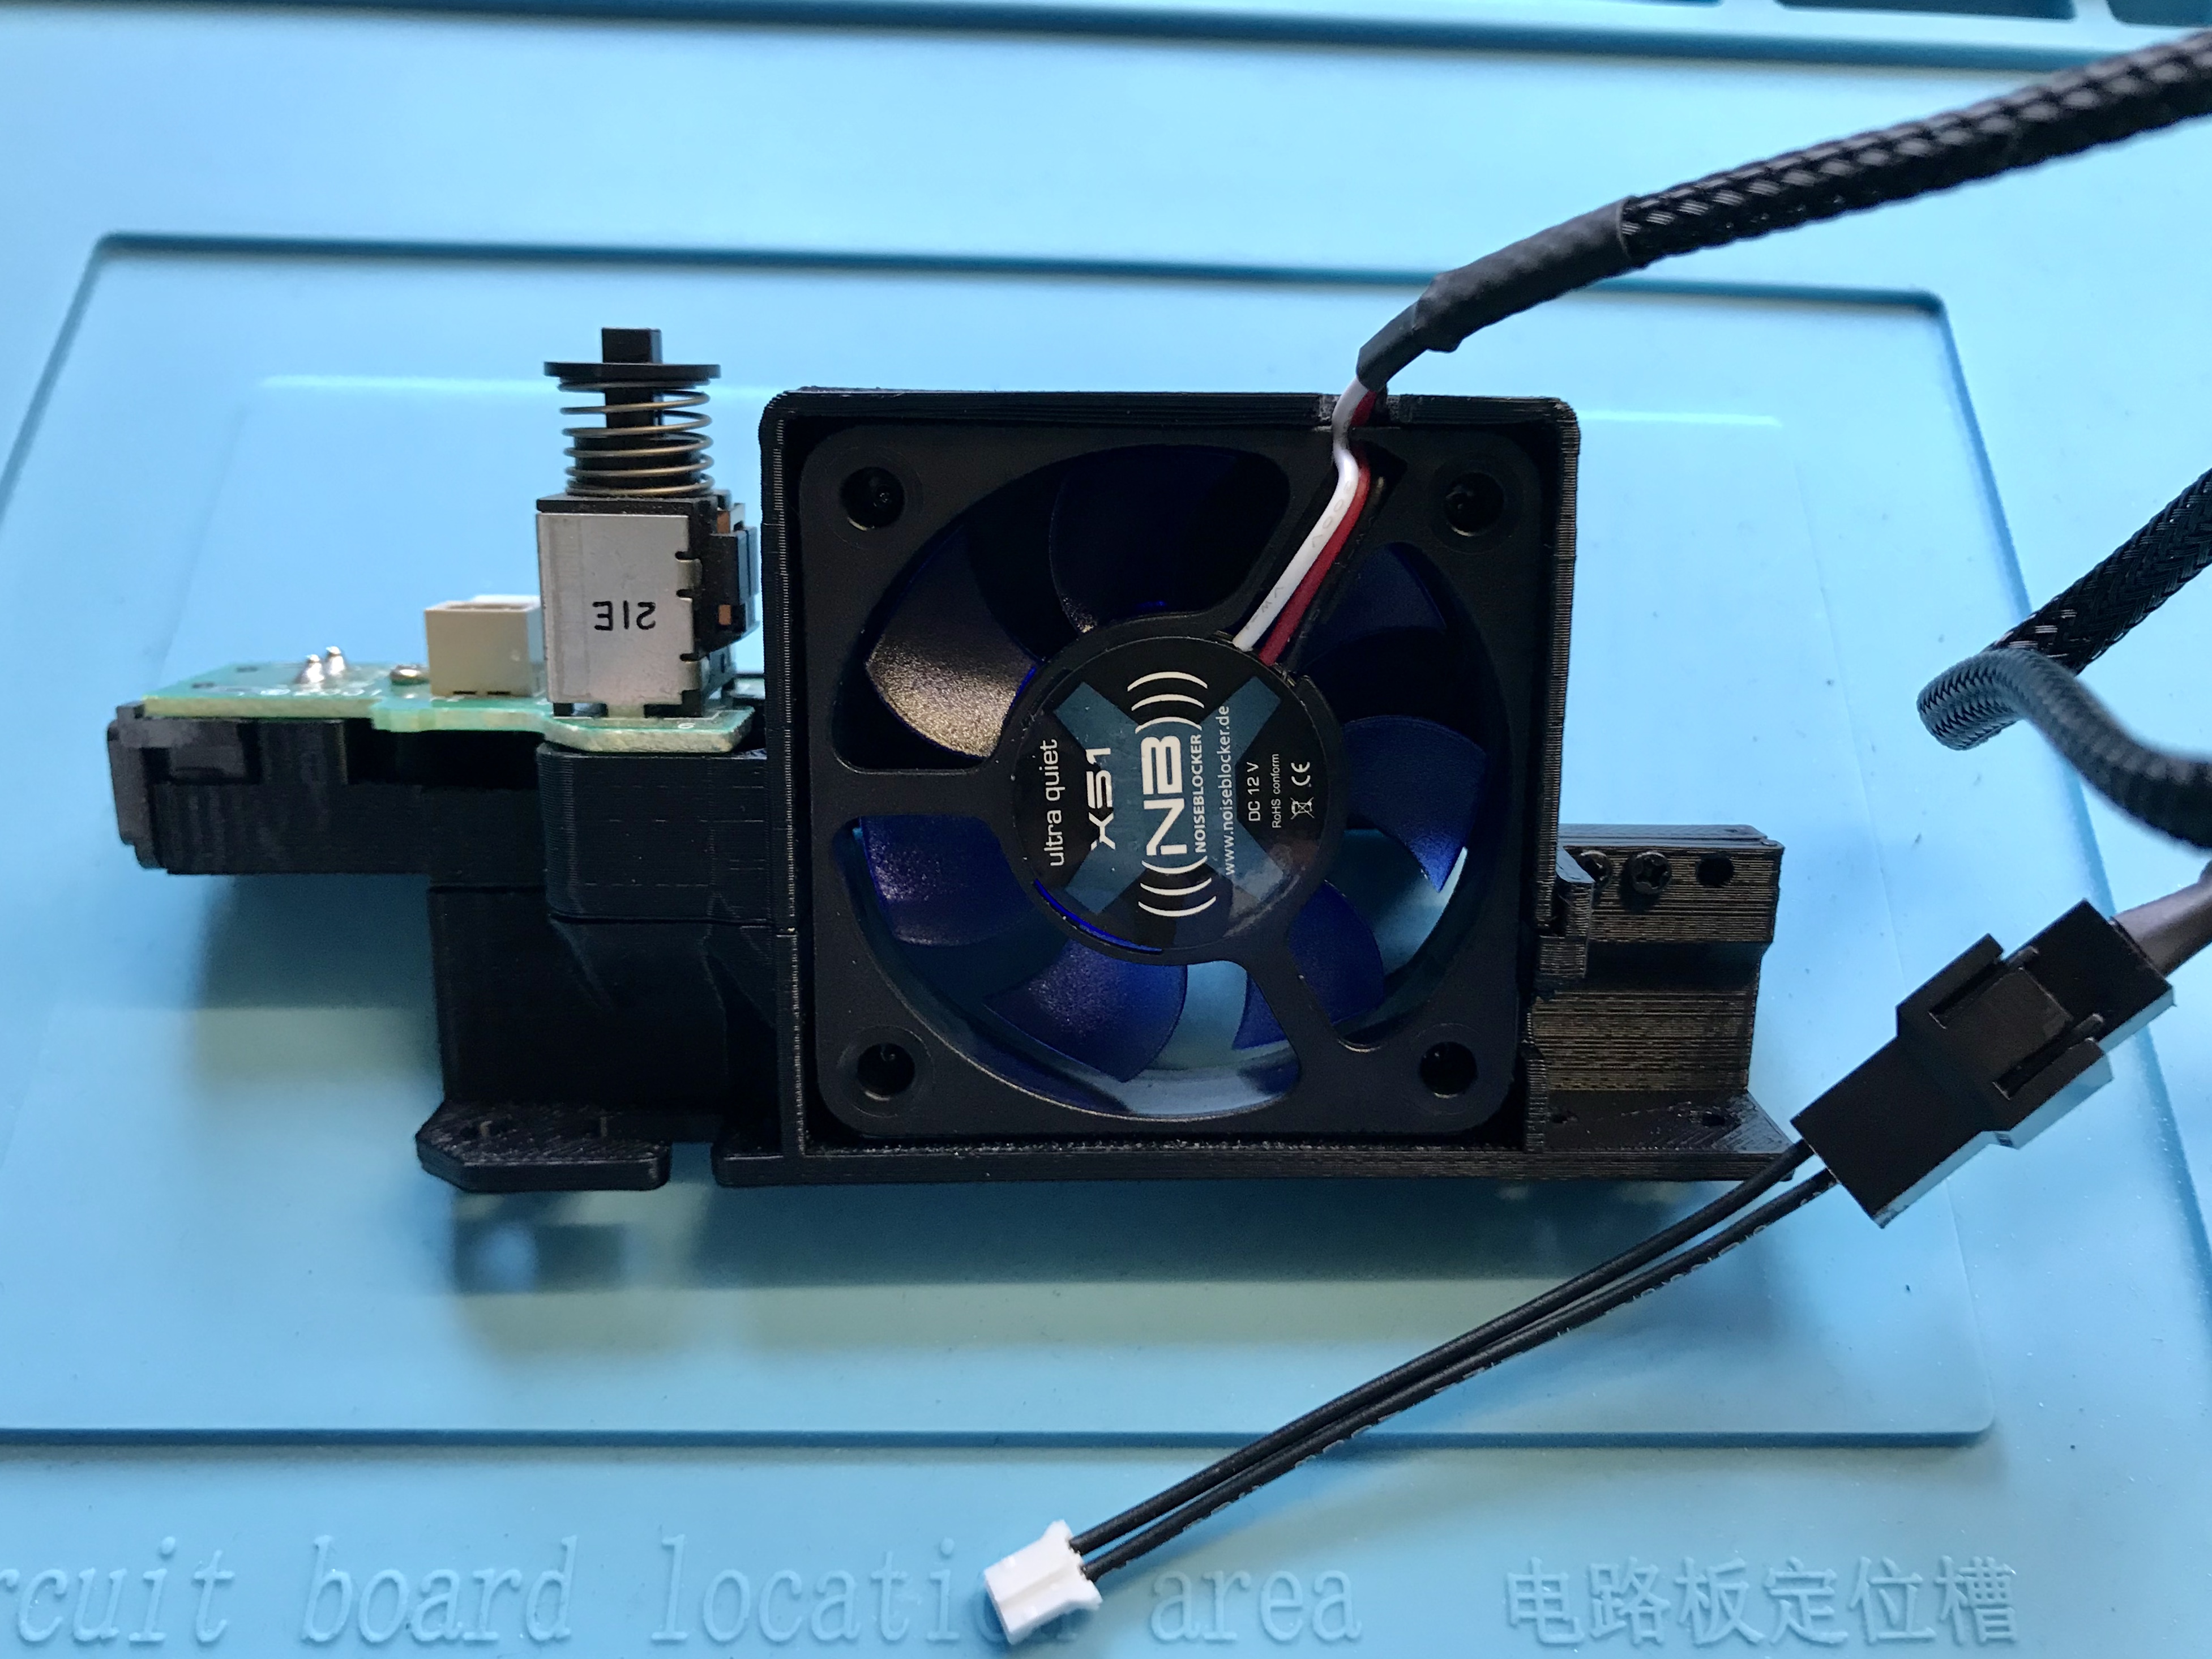 Fan mount with fan power switch board and cable adapter fitted ready for installation into GameCube